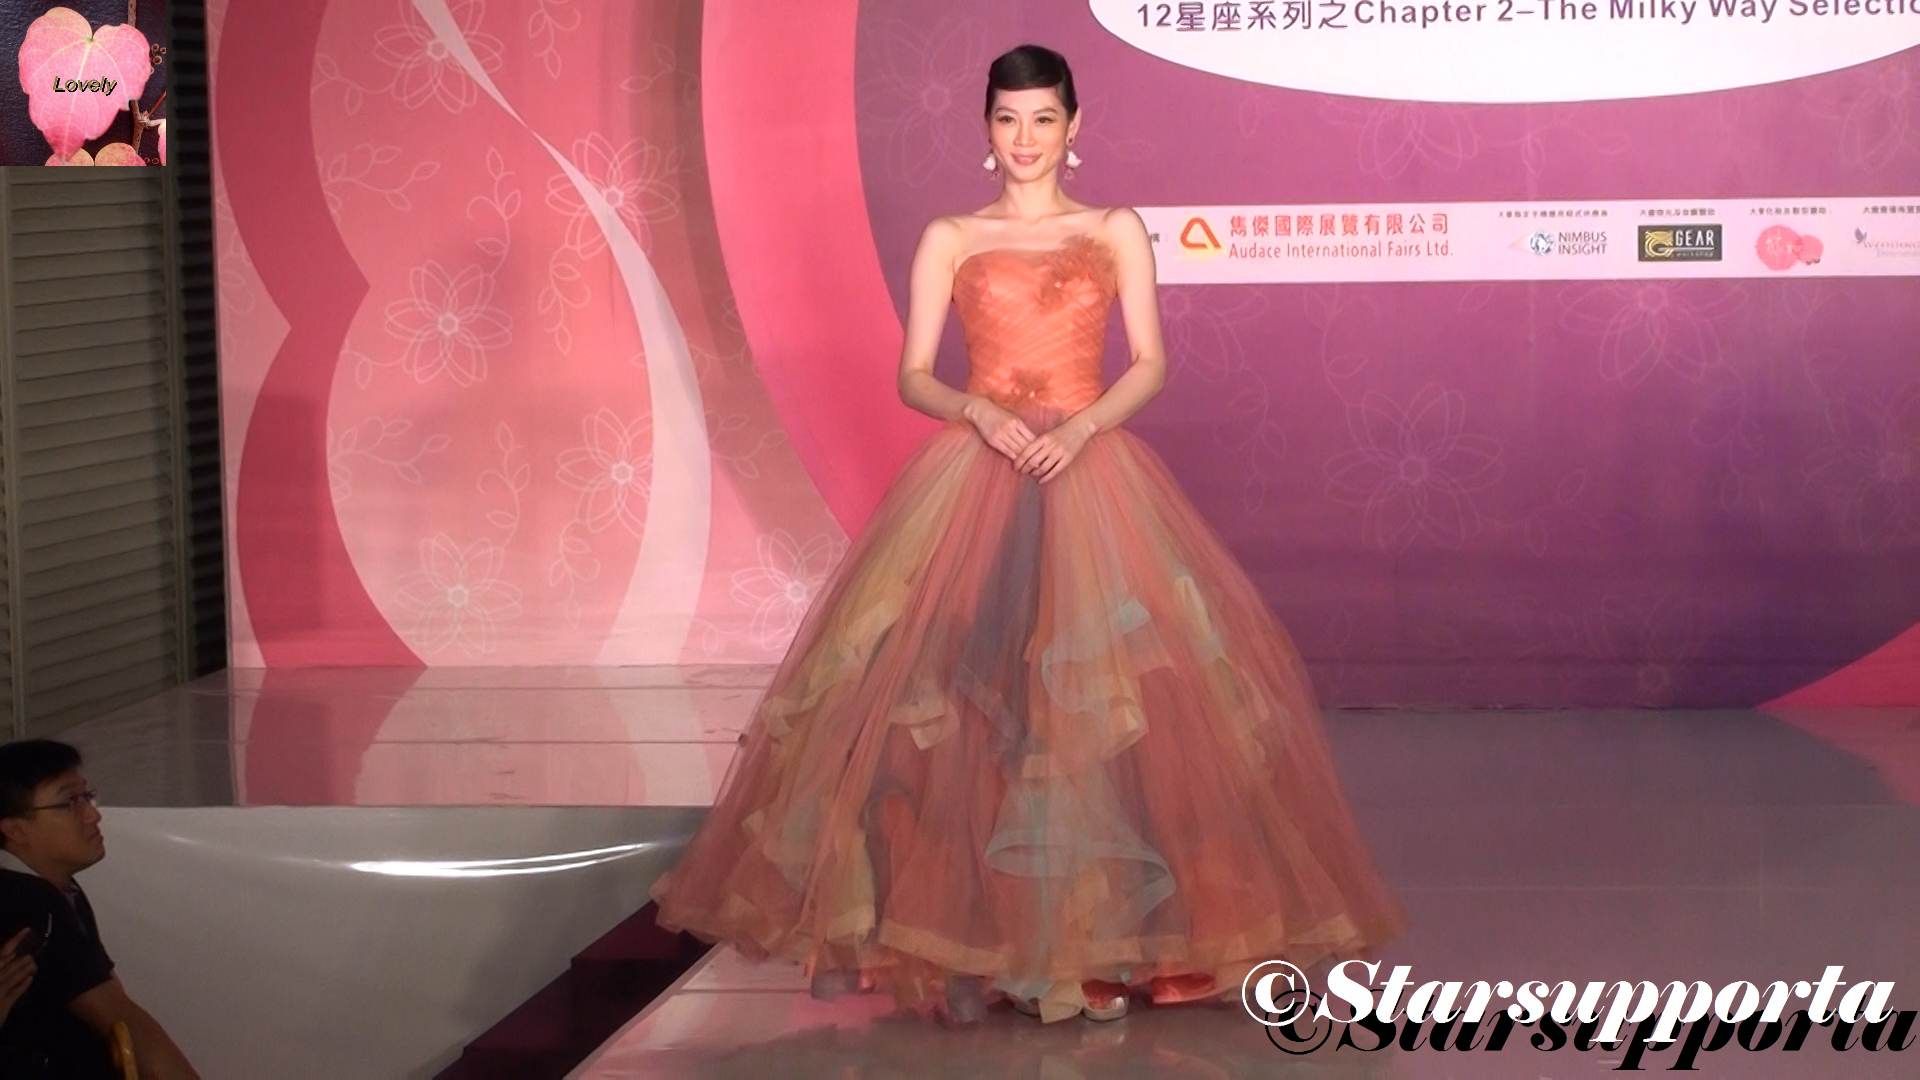 20141108 Favour - 12星座系列 Chapter 2 - The milky way of selection @ Hong Kong Wedding Expo 2014 @ HKCEC